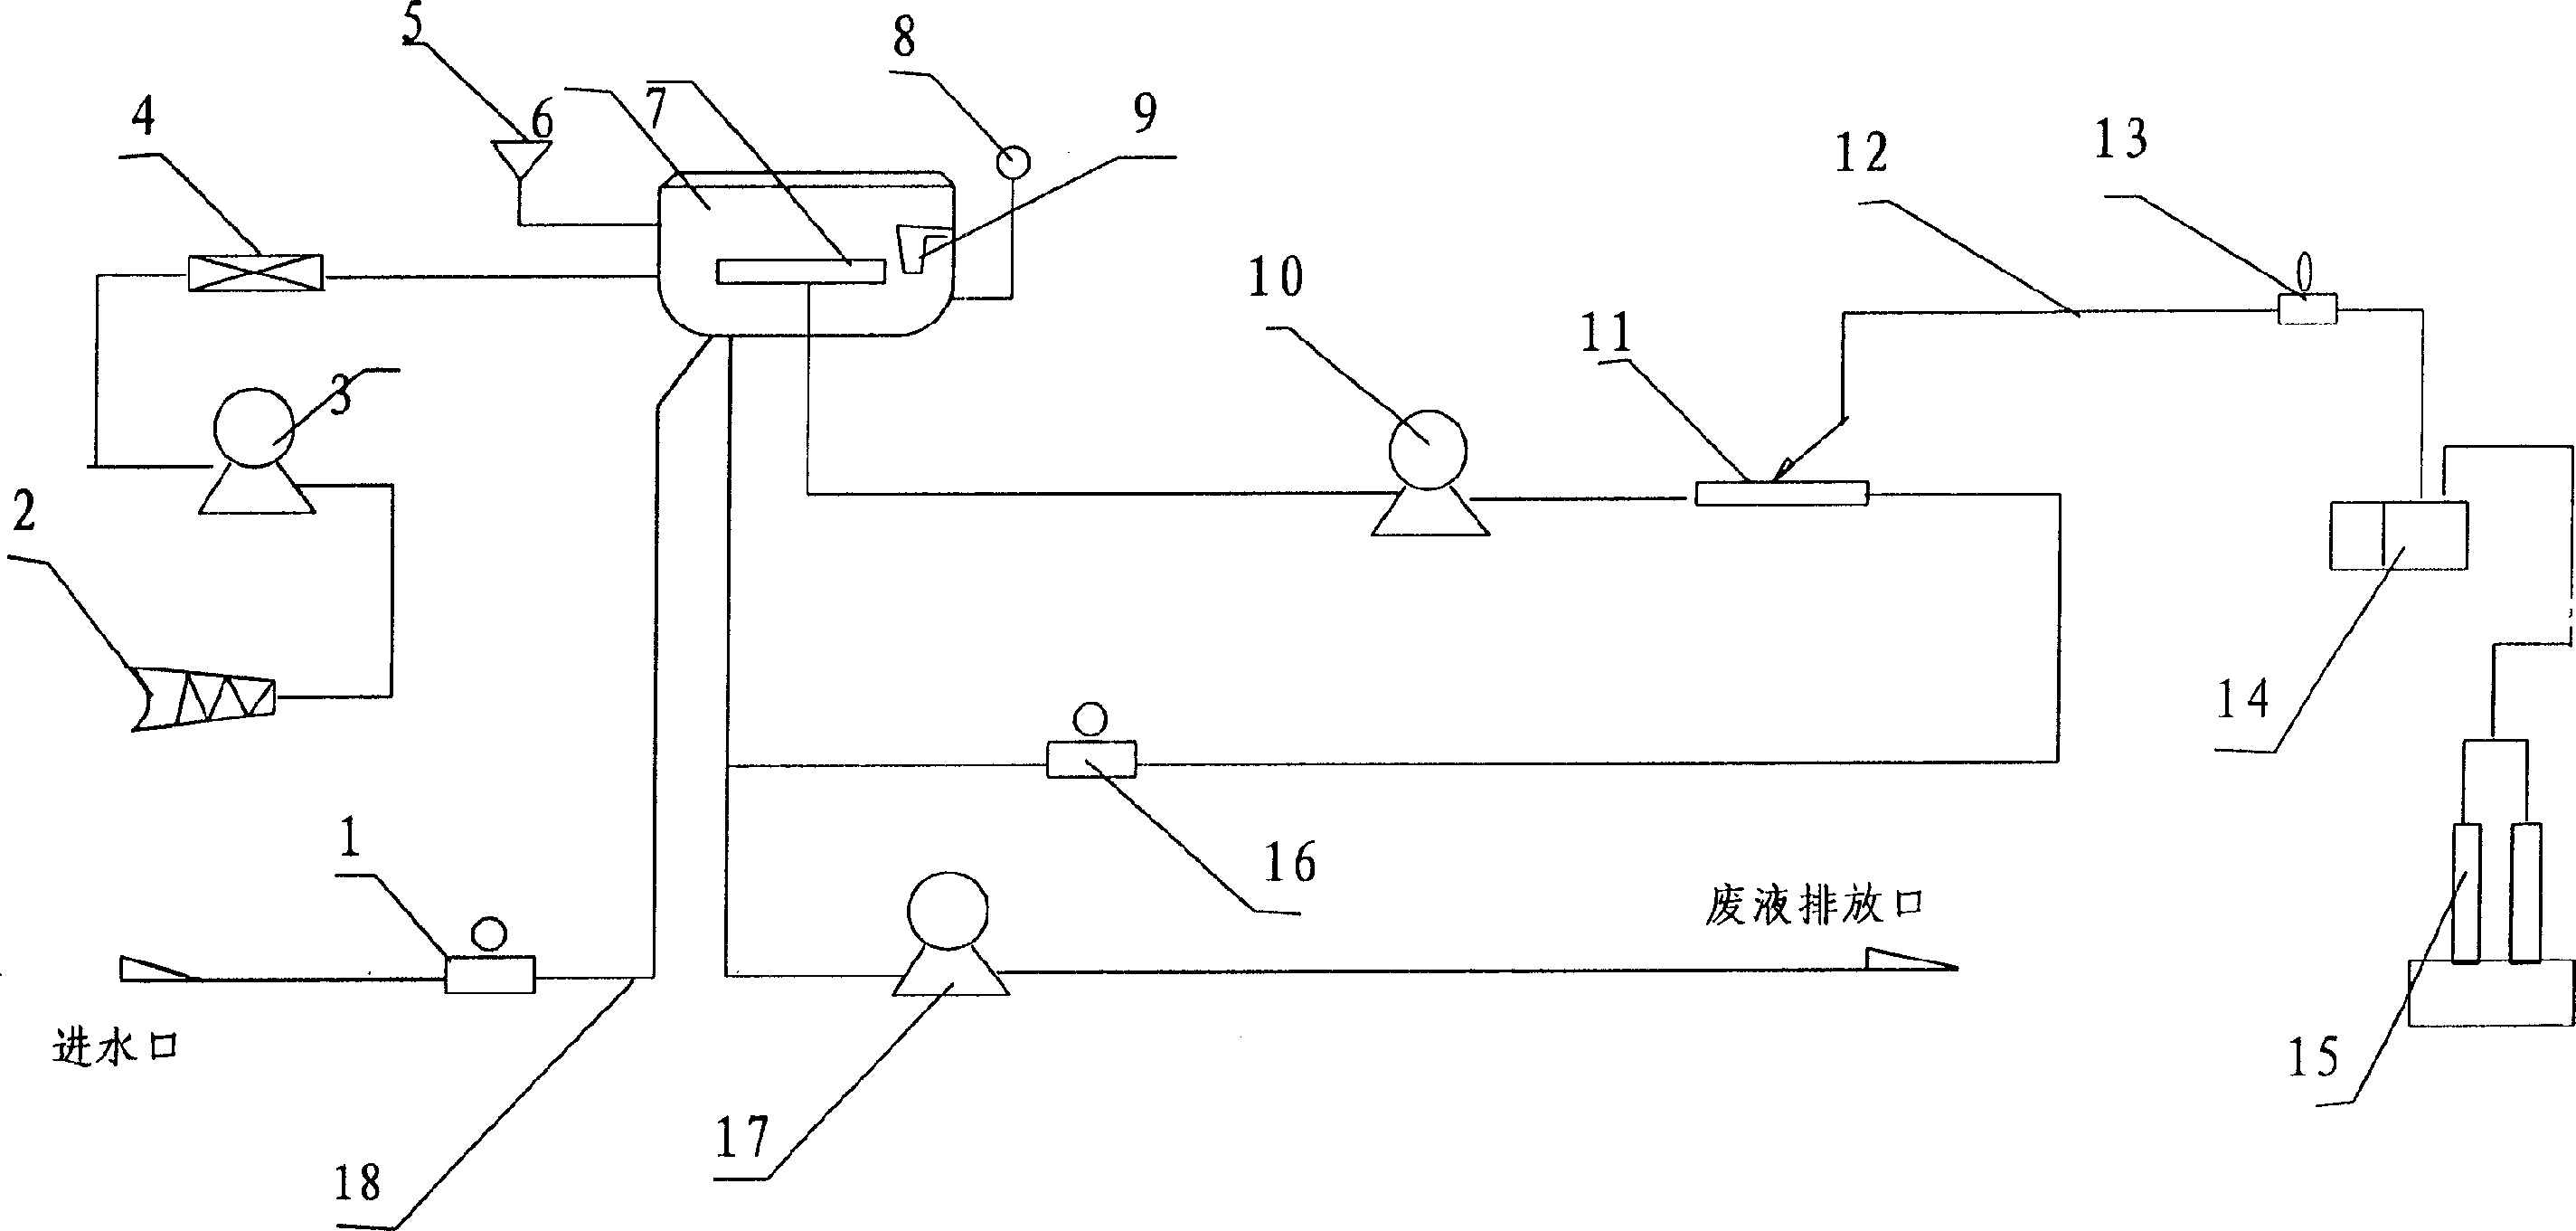 Method for disinfecting and sterilizing appliances as well as washing and sterilizing equipment